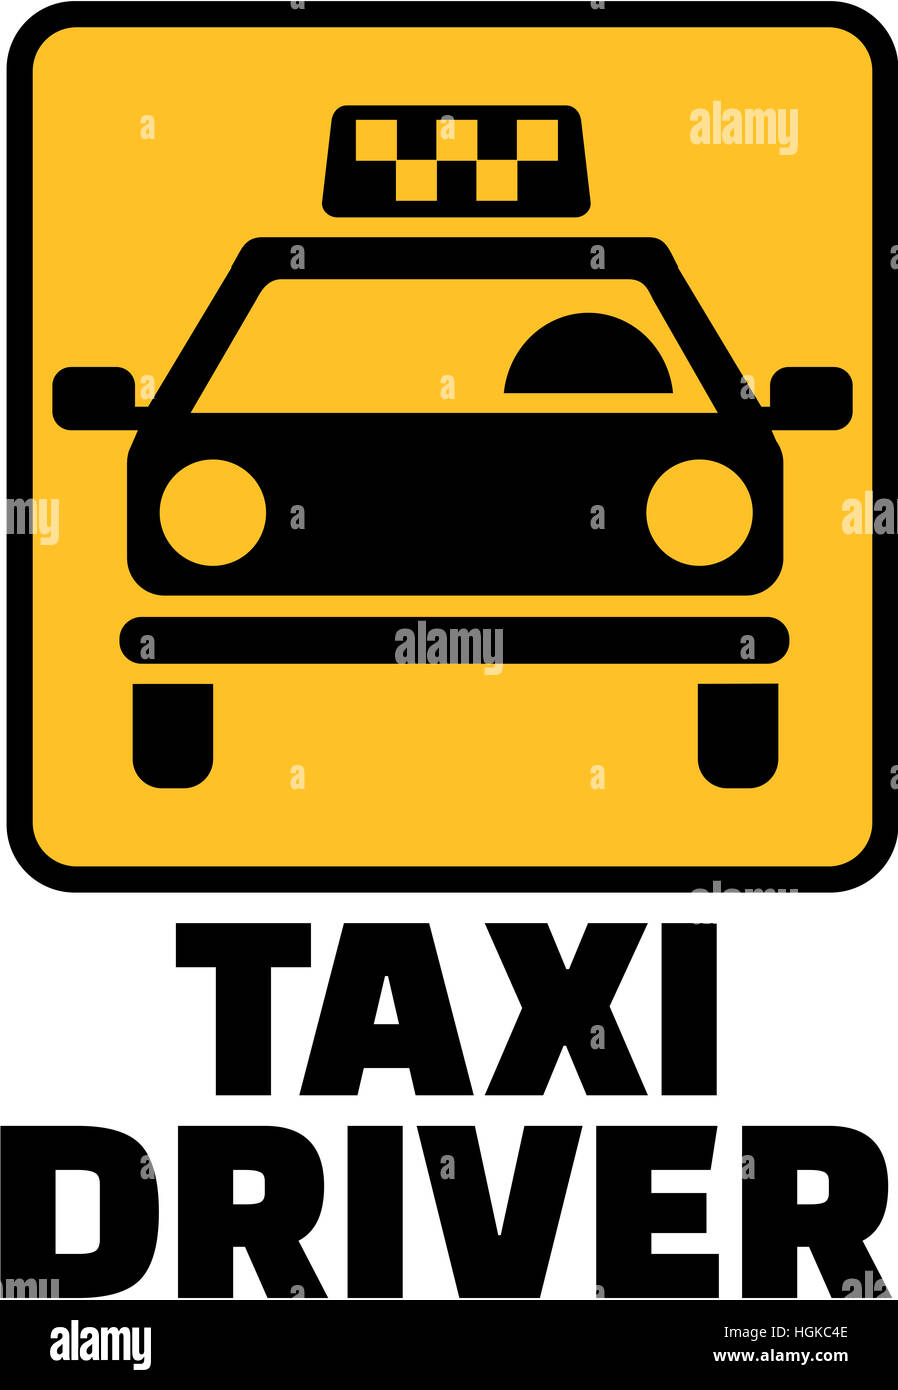 Taxi driver with yellow cab icon Stock Photo